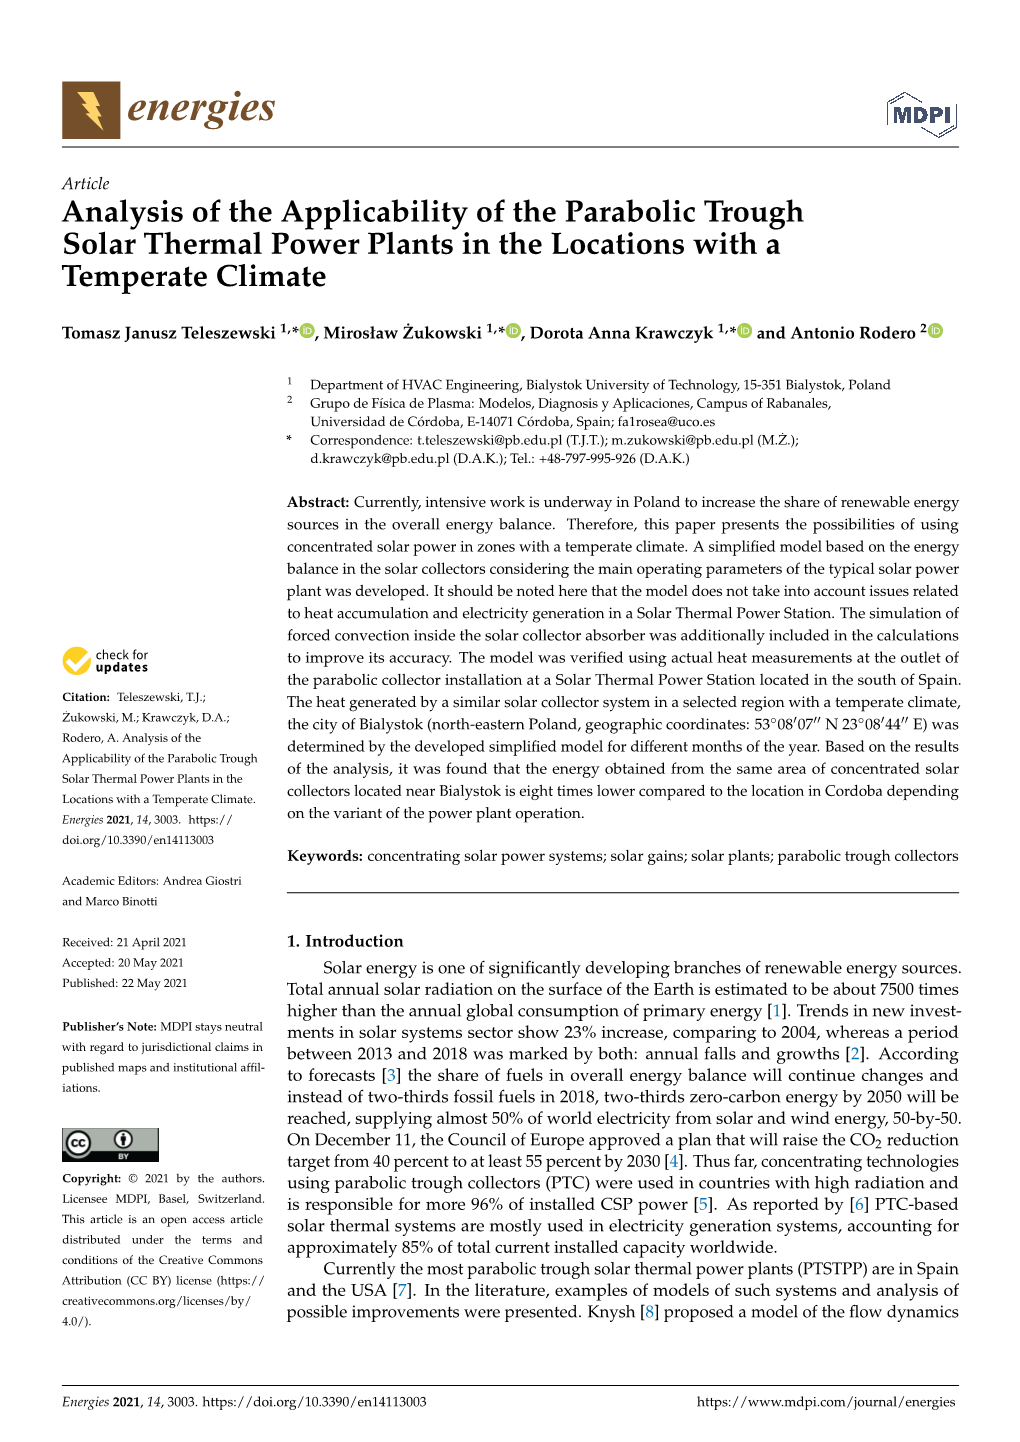 Analysis of the Applicability of the Parabolic Trough Solar Thermal Power Plants in the Locations with a Temperate Climate